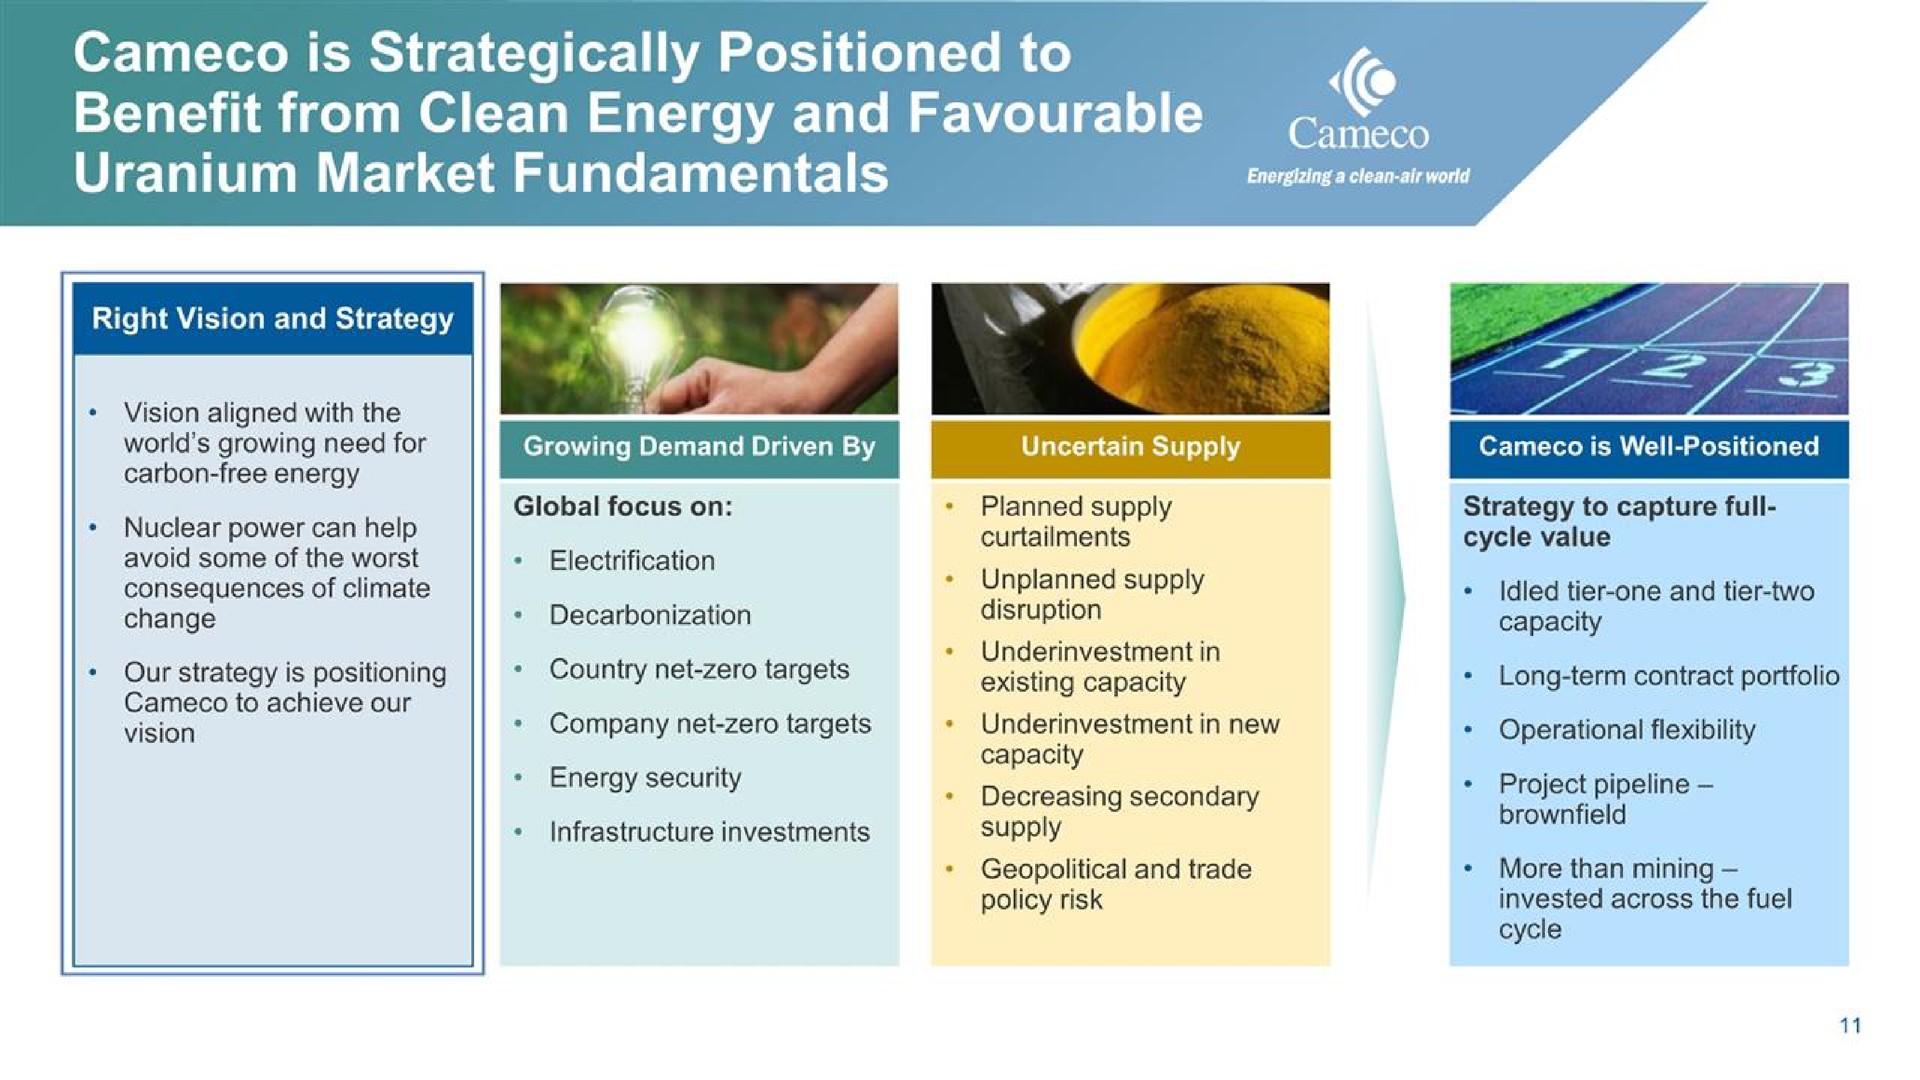 see is strategically positioned to benefit from clean energy and uranium market fundamentals | Cameco